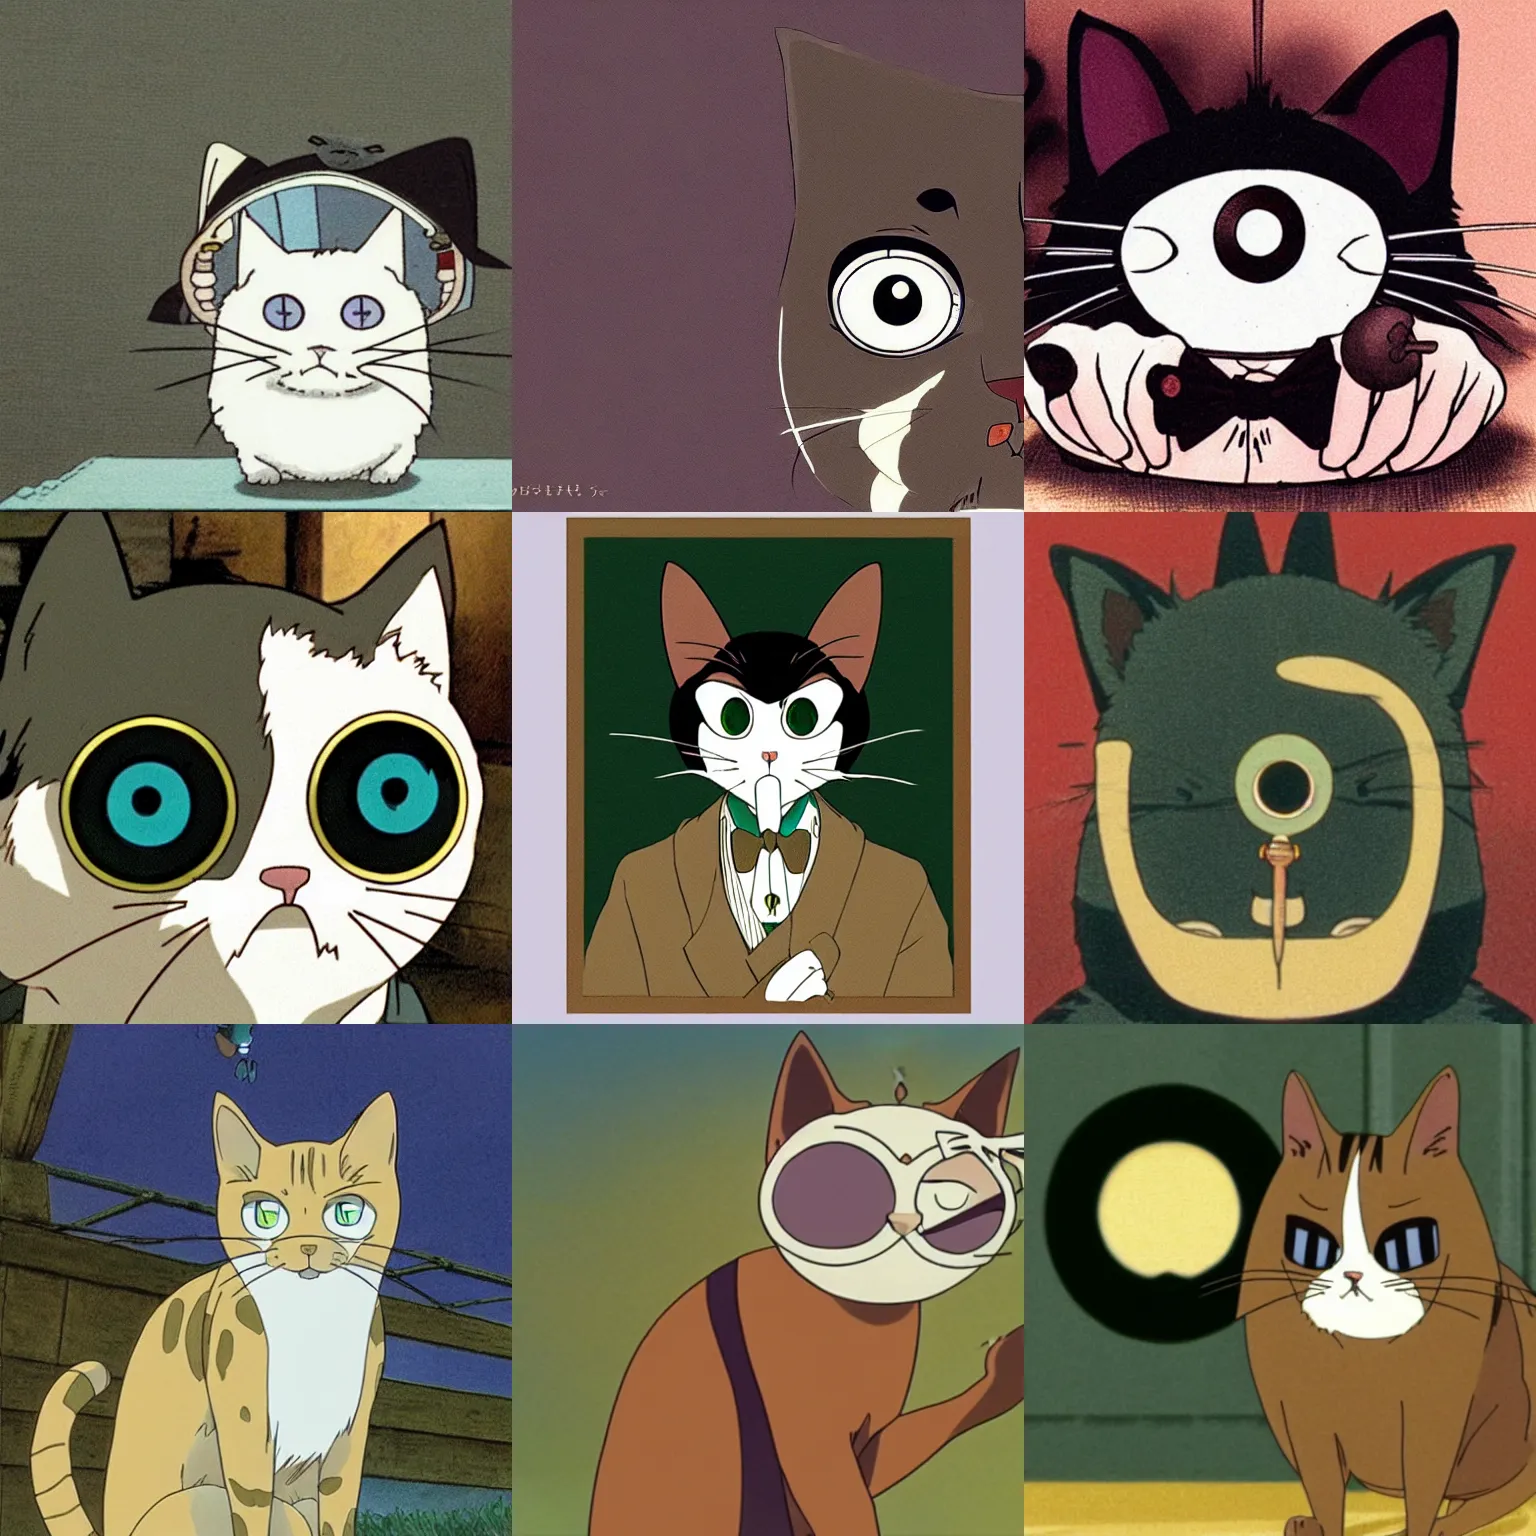 Prompt: portrait of a cat wearing a monocle, still from the anime by studio ghibli